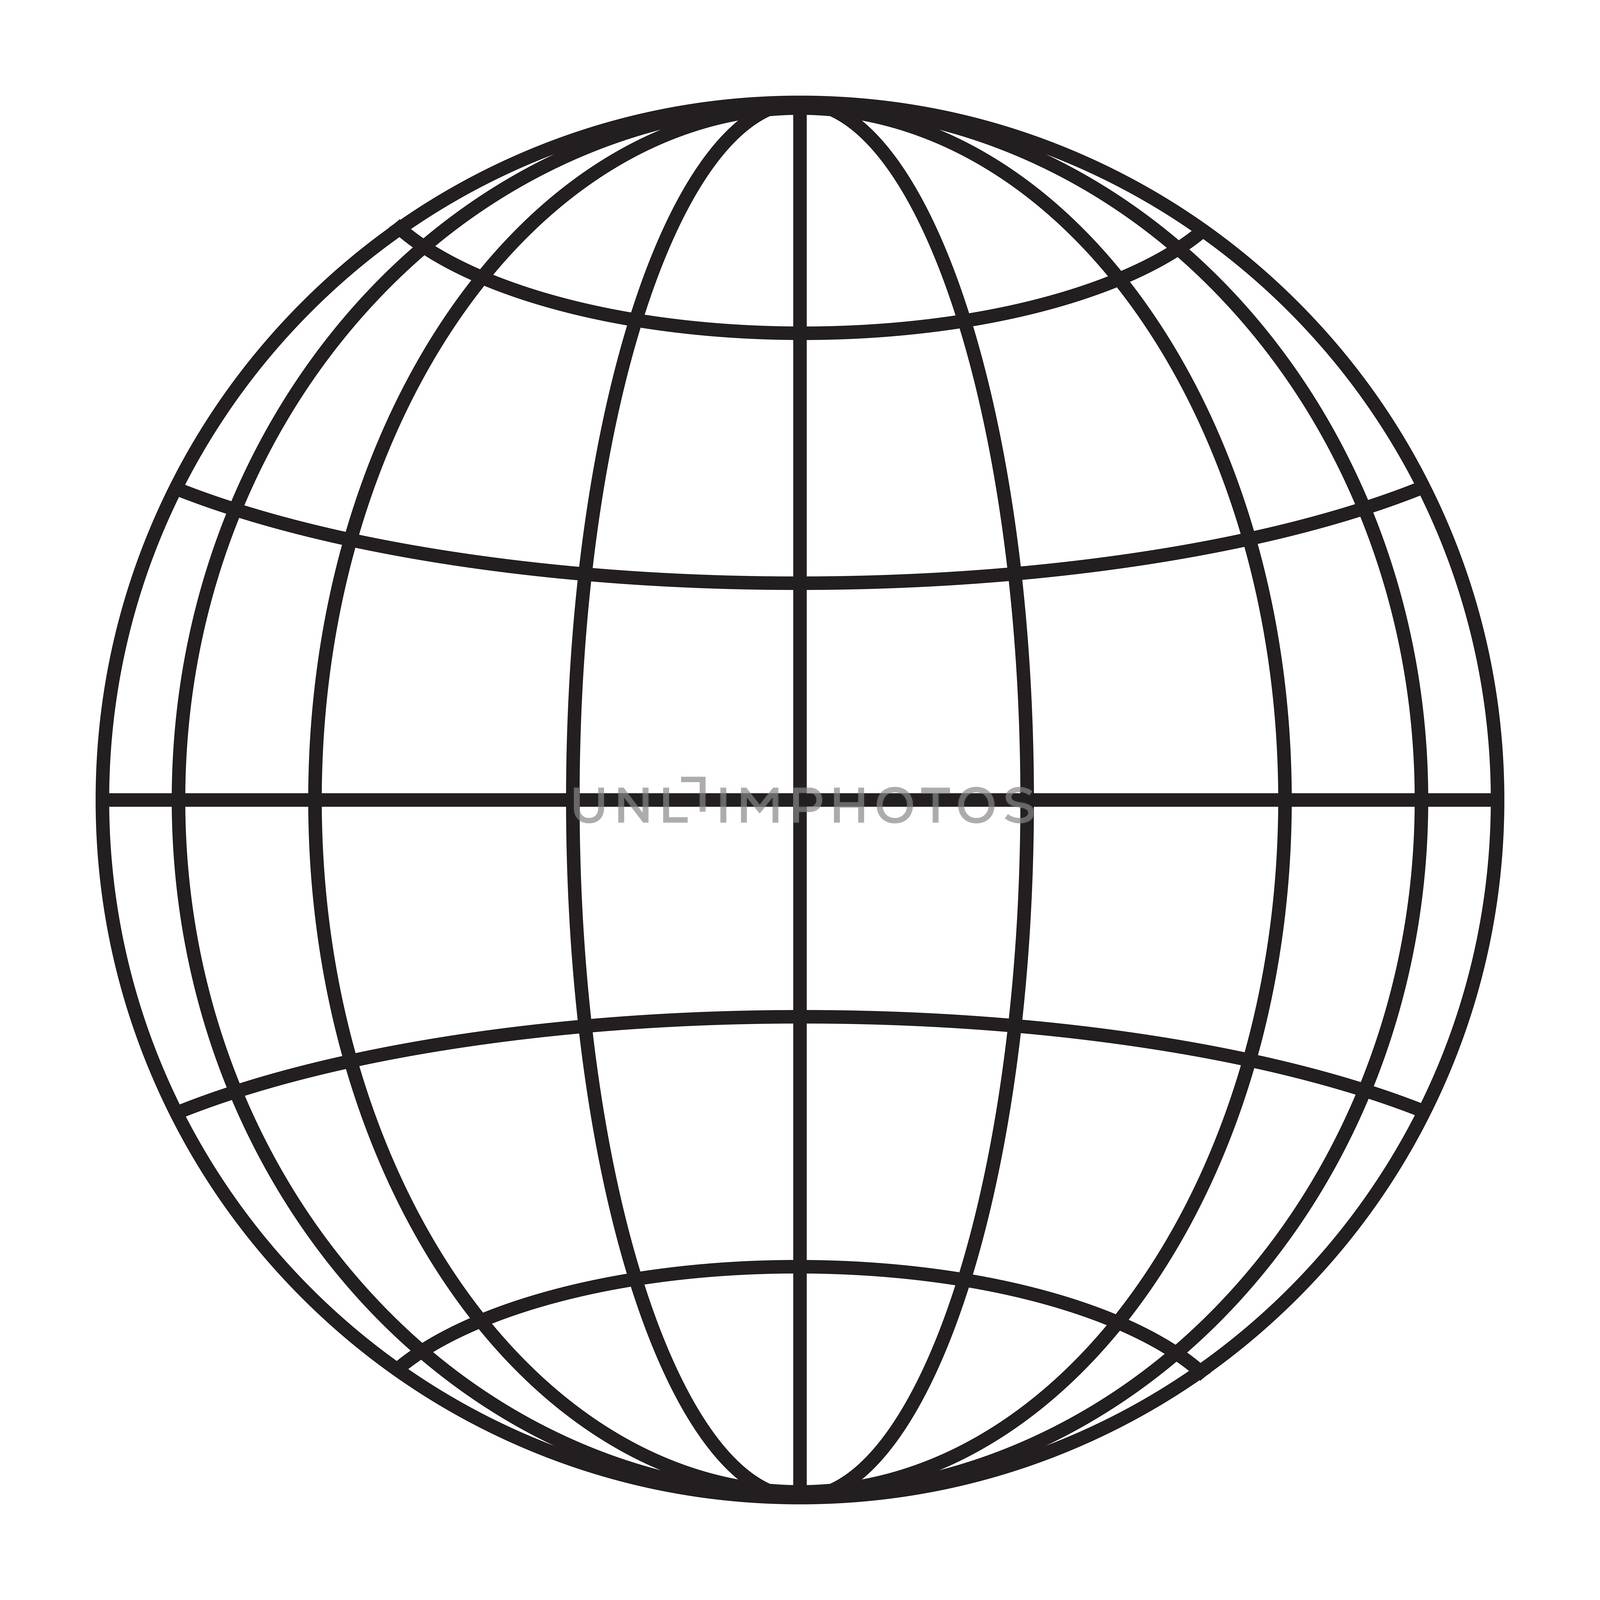 A black and white wire mesh representation of a globe isolated on white